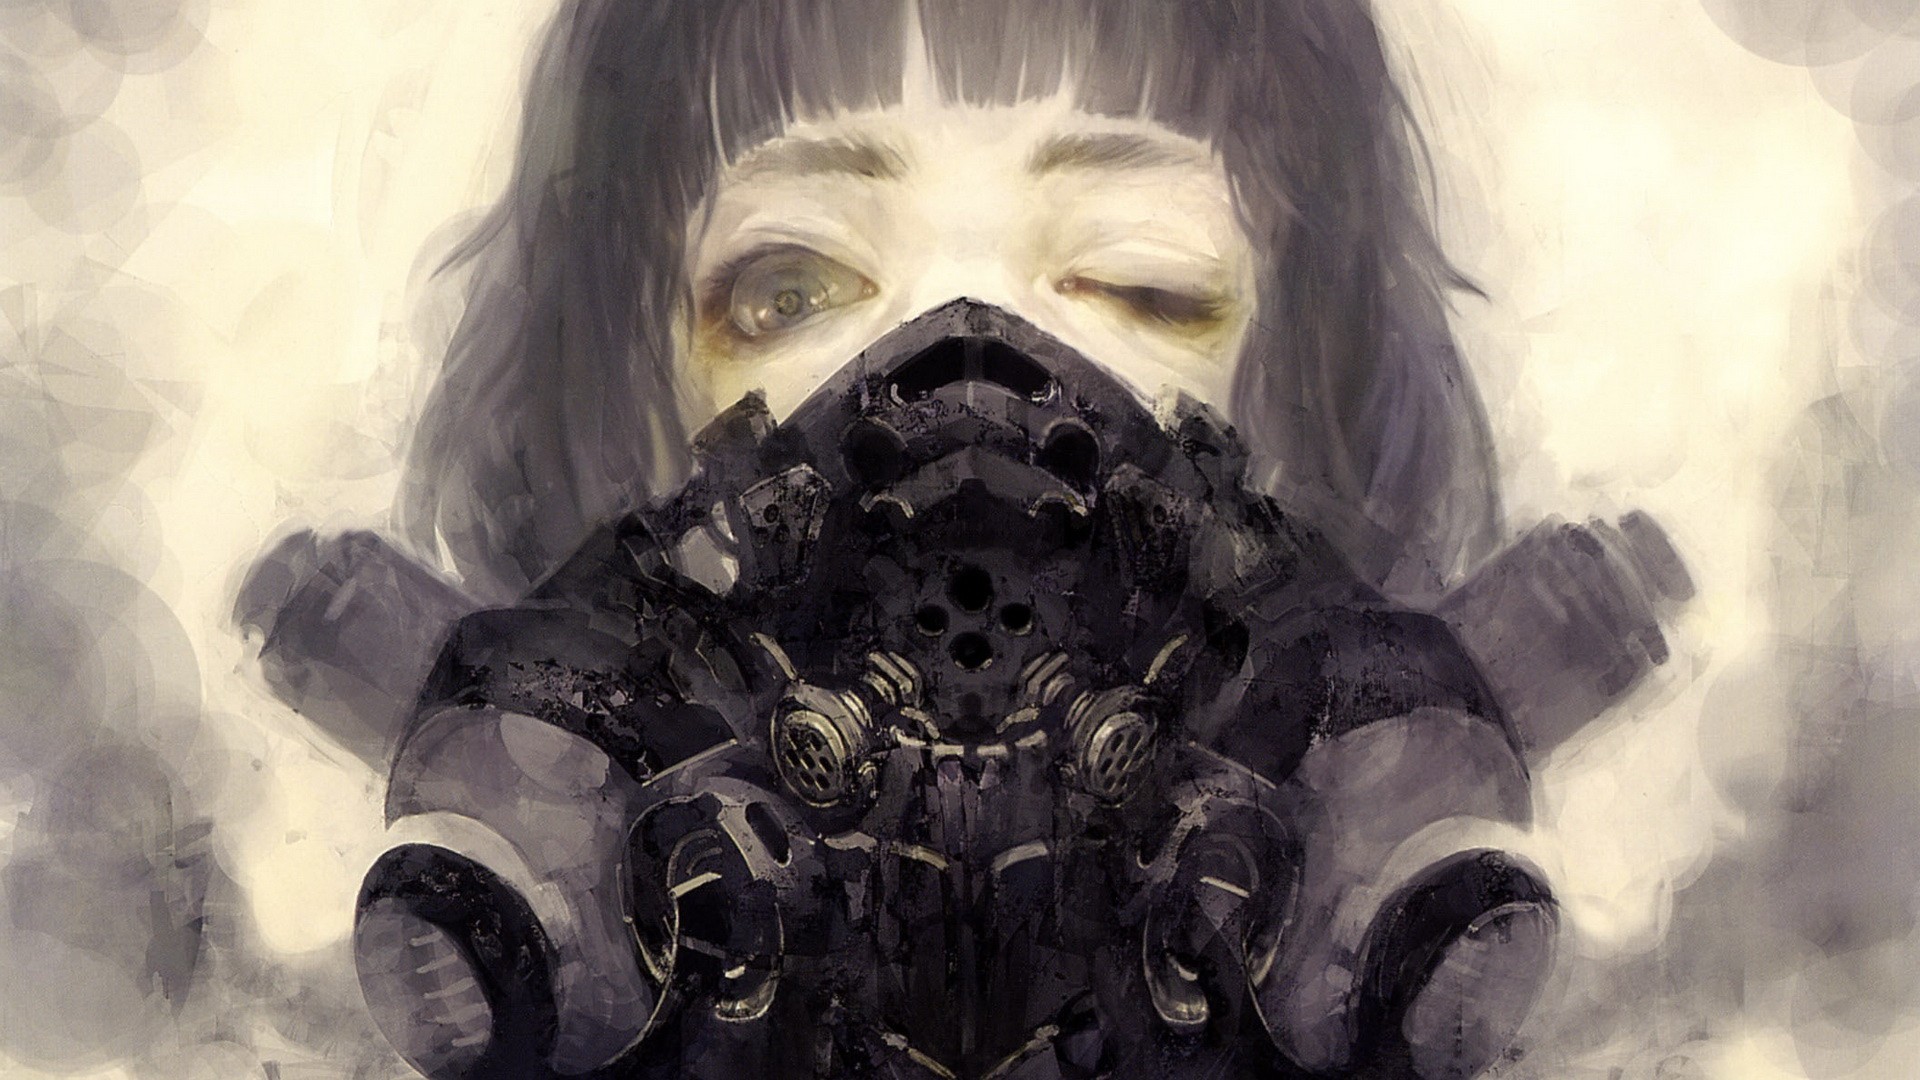 1920x1080 creepy anime girl in a weird scary-looking mask, black hair, brown eyes.